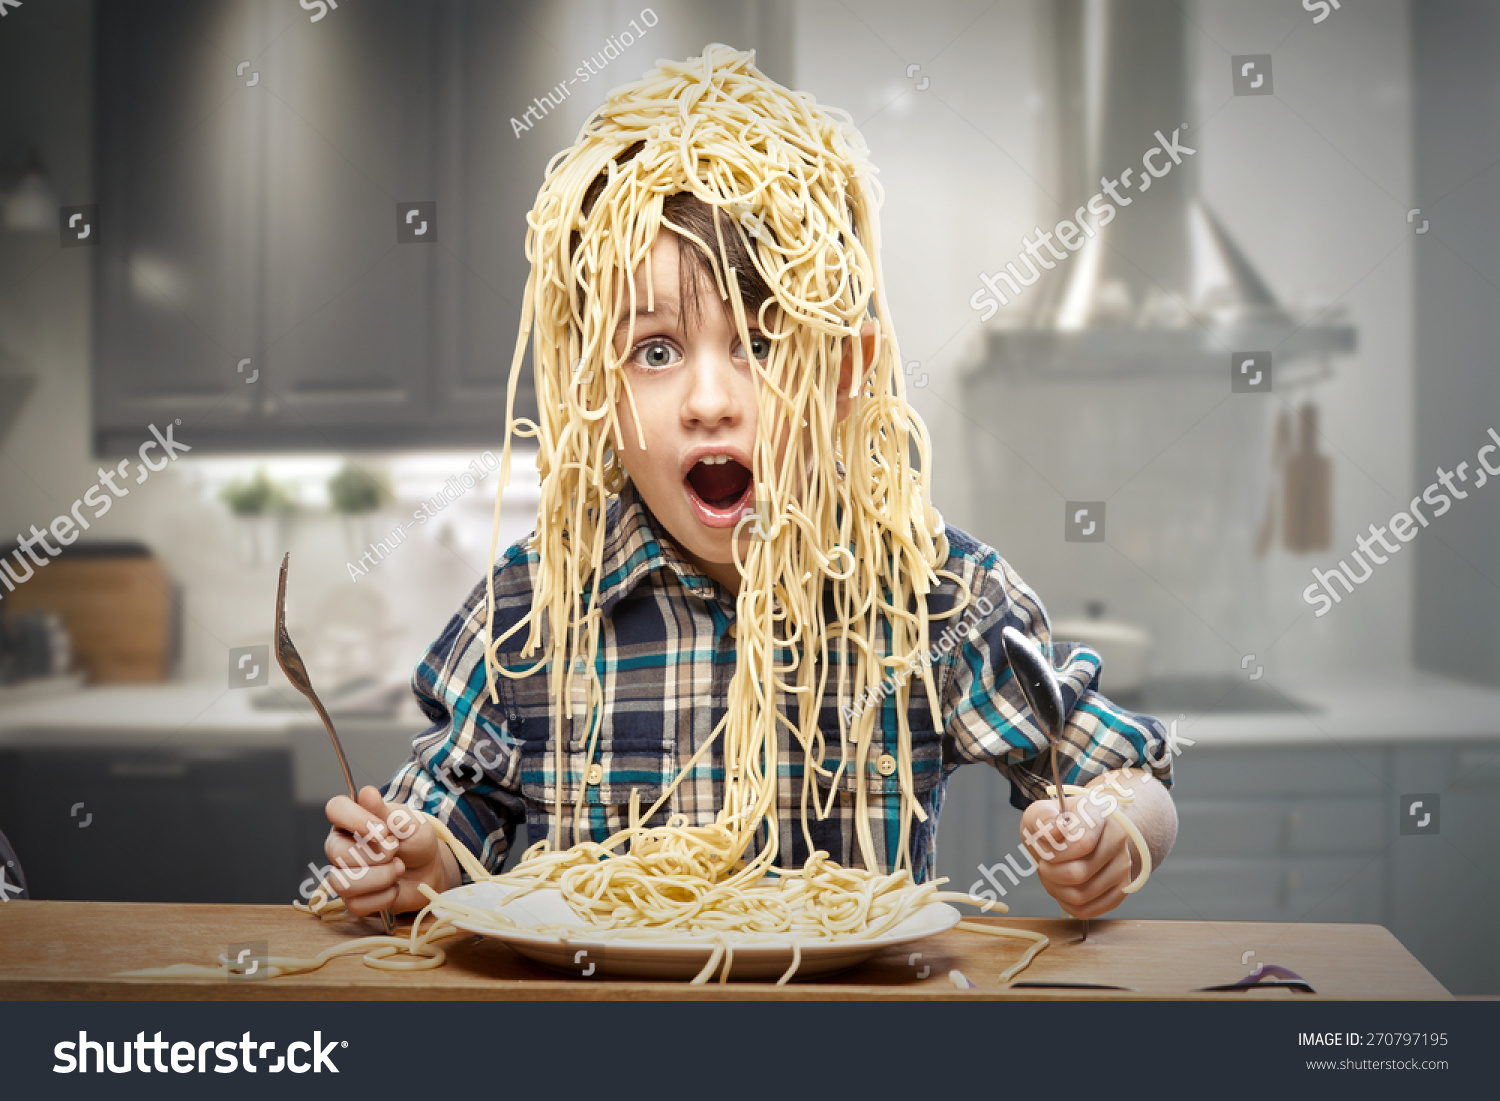 stock-photo-surprised-boy-with-pasta-on-the-head-270797195.jpg